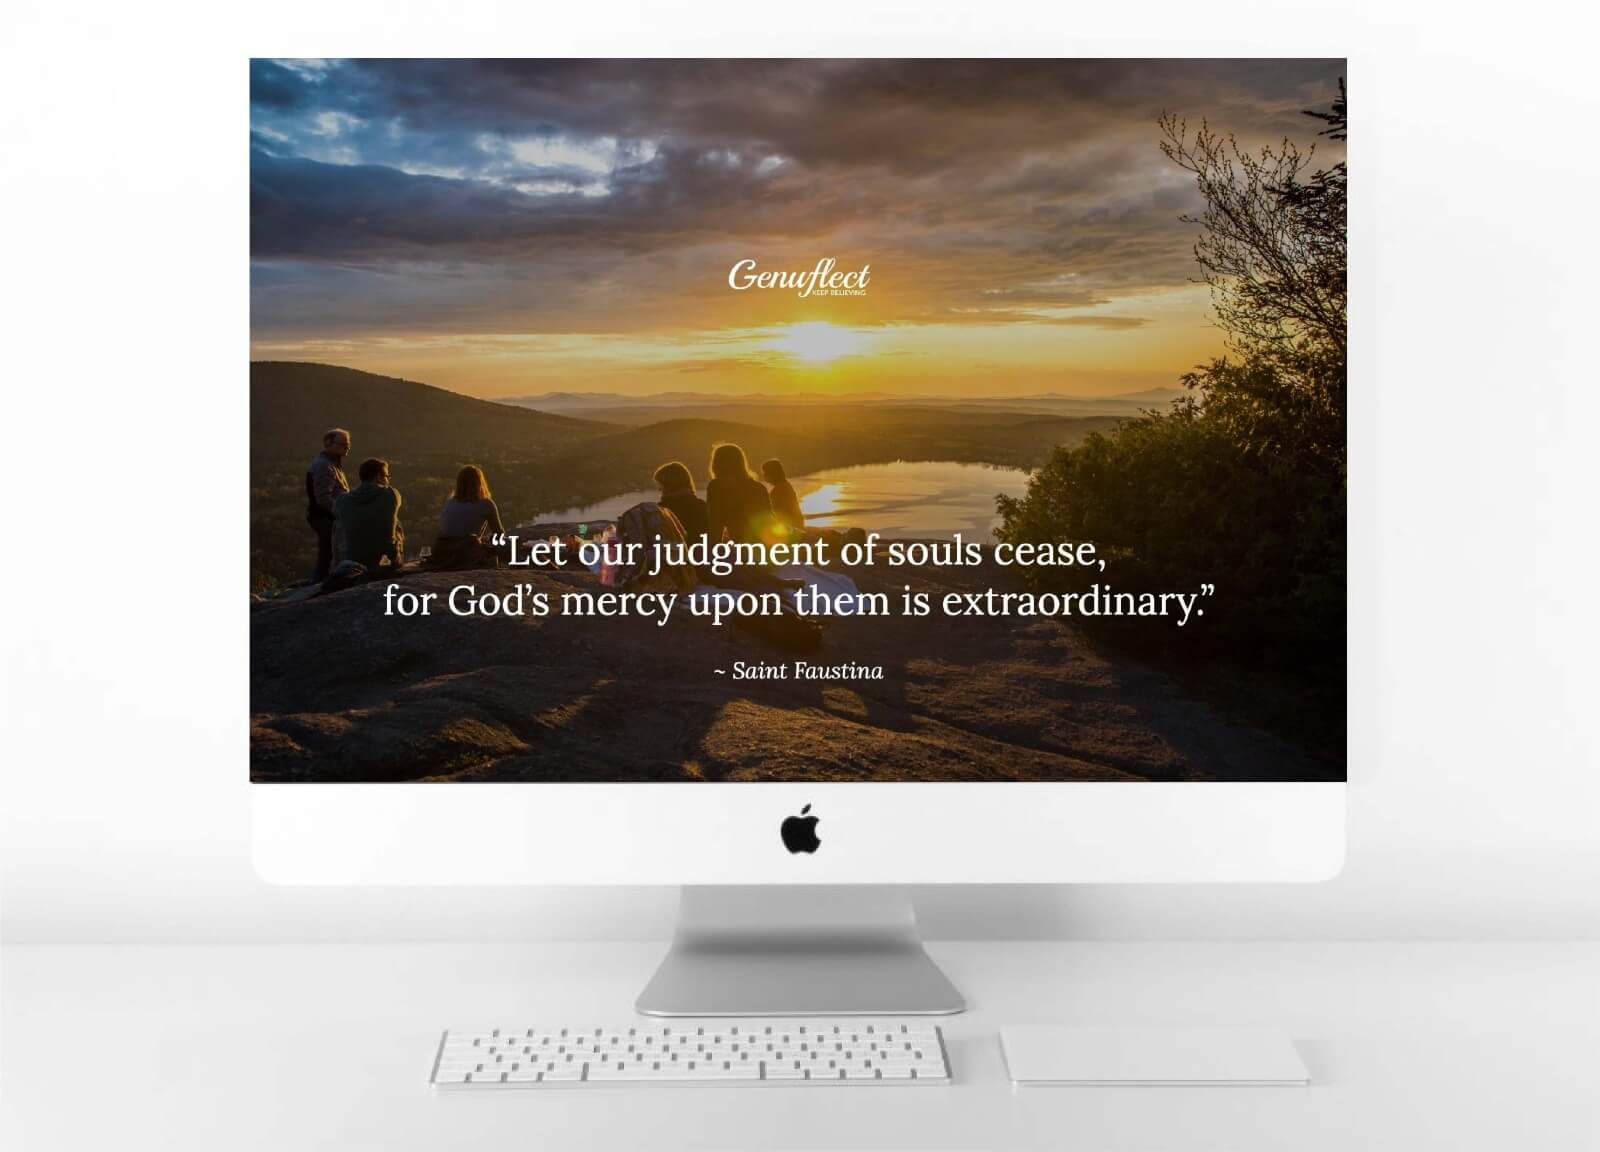 Genuflect image on background of computer of A group of people sitting on a mountain overlooking a lake at sunset